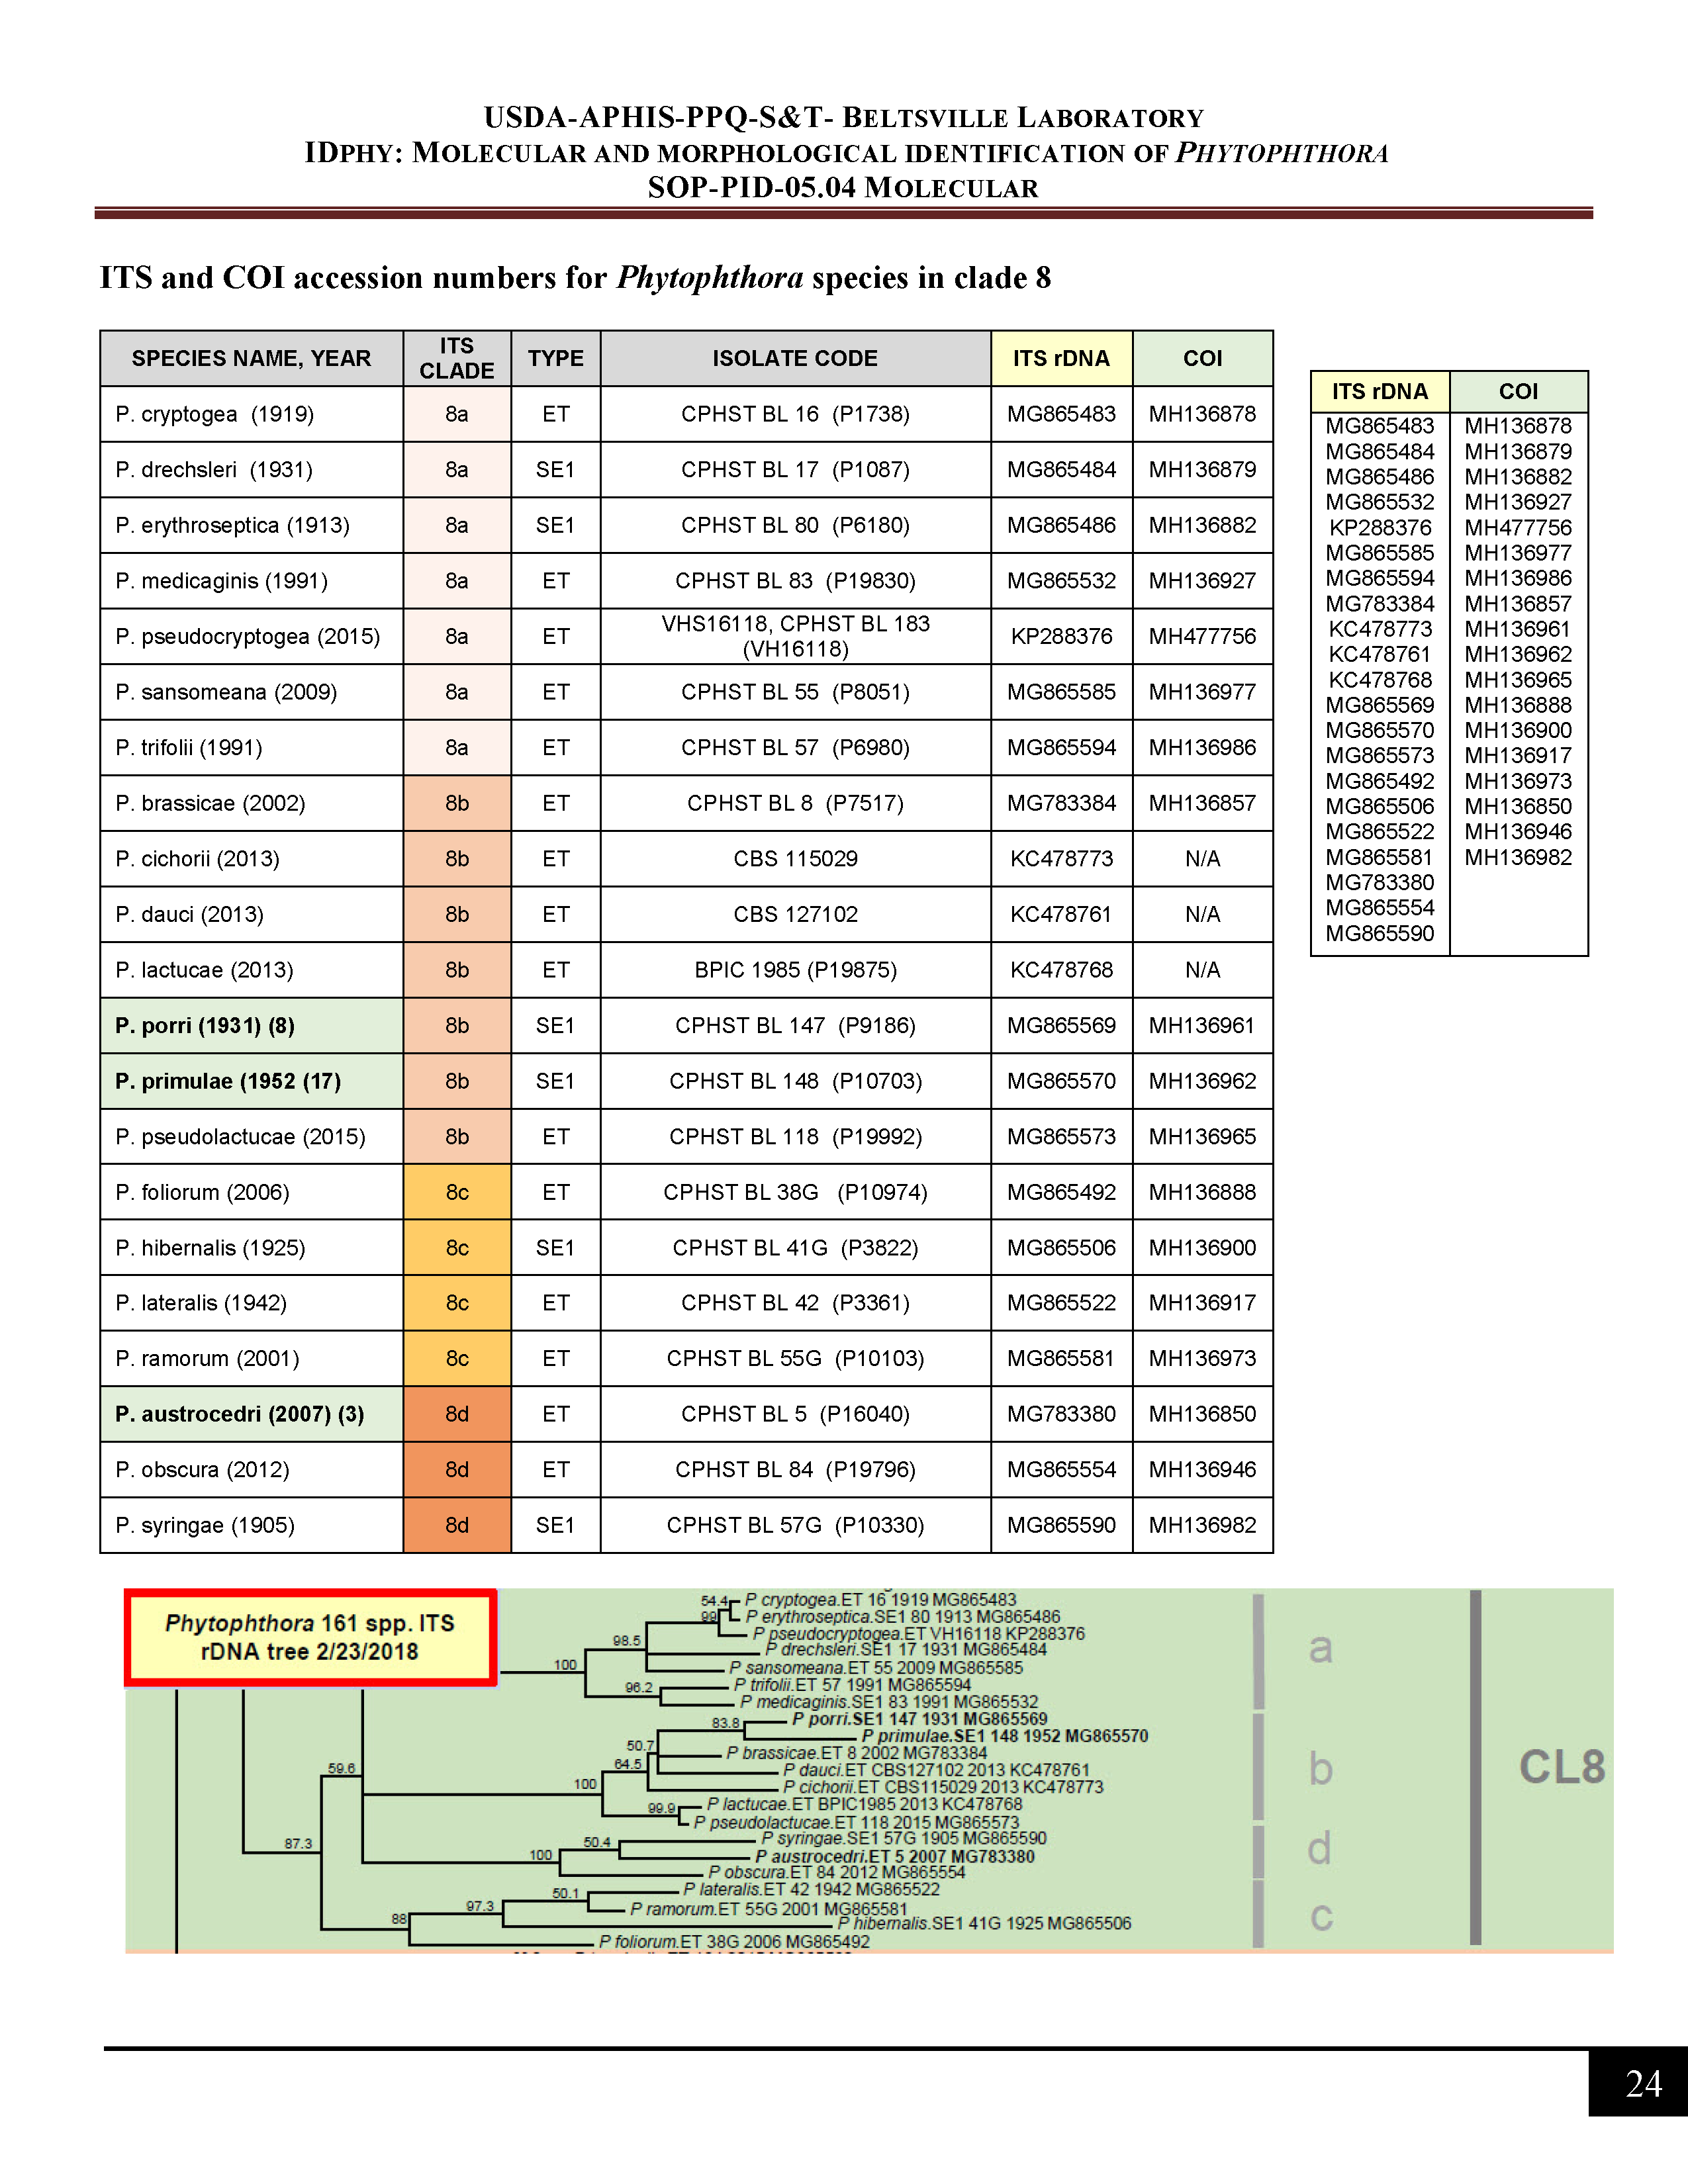 ITS and COI accession numbers for <em>Phytophthora</em> species in clade 8